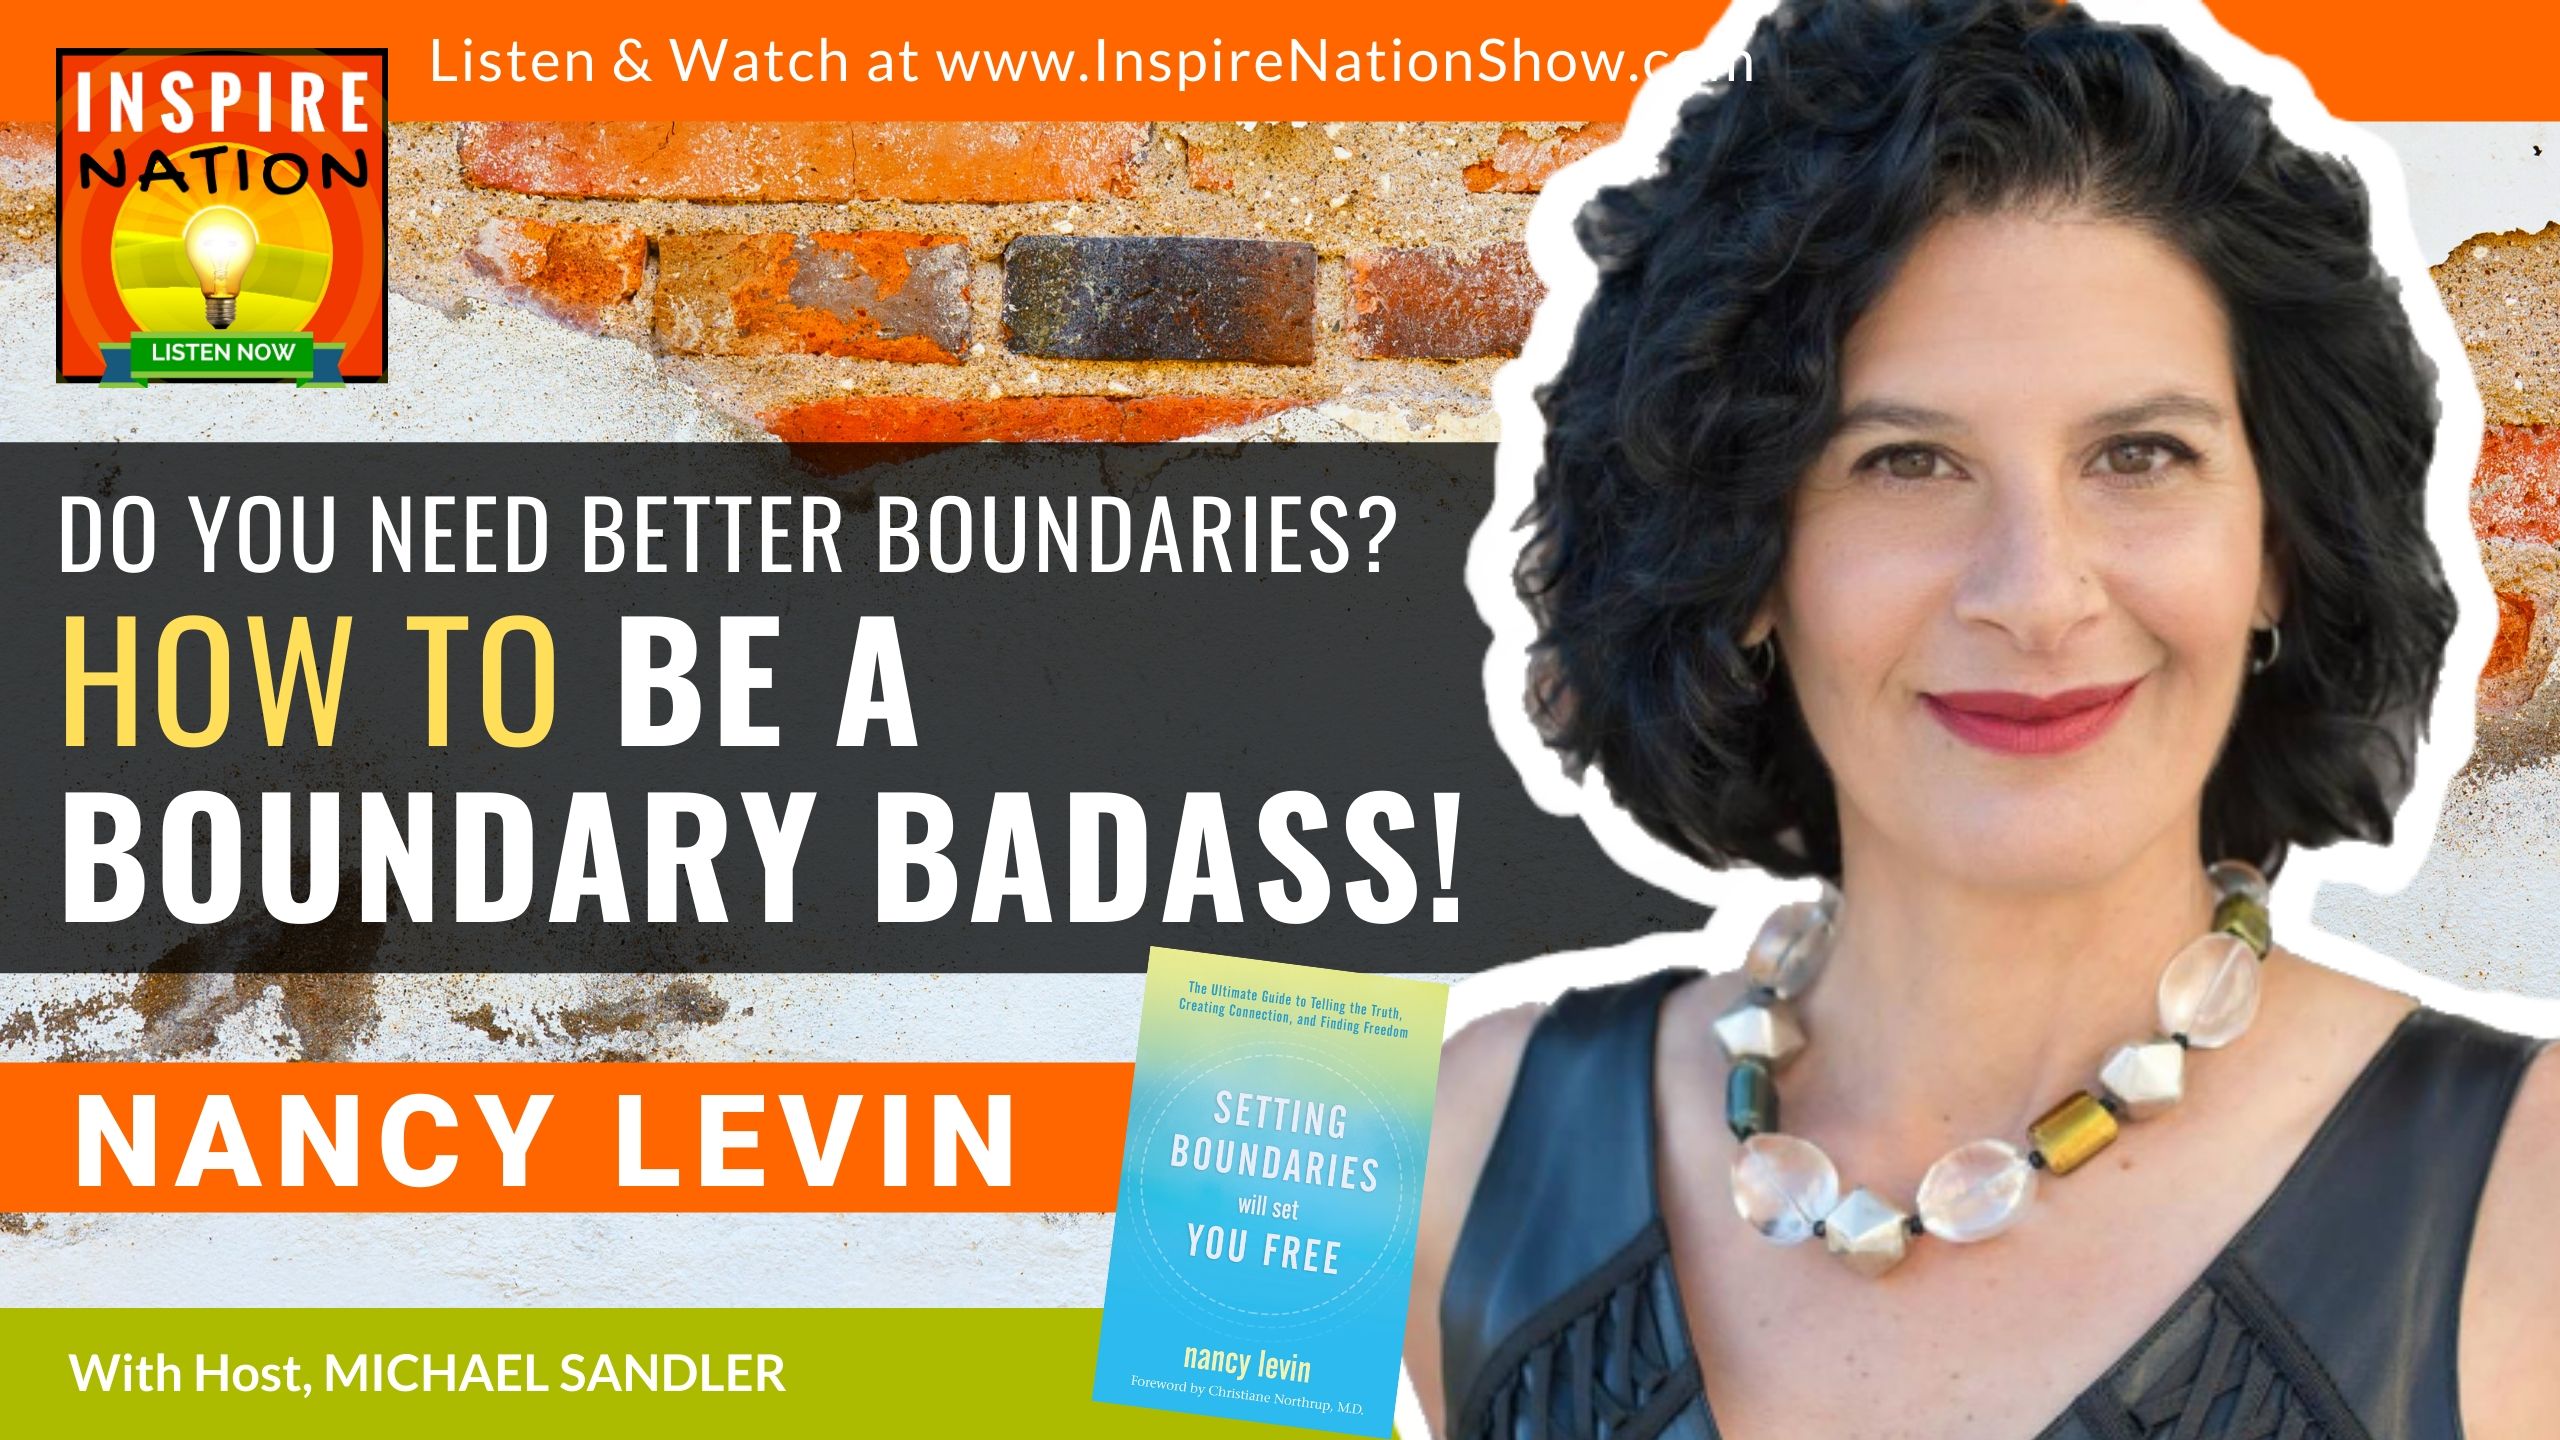 Michael Sandler interviews Nancy Levin on how to know when you need to set better boundaries!